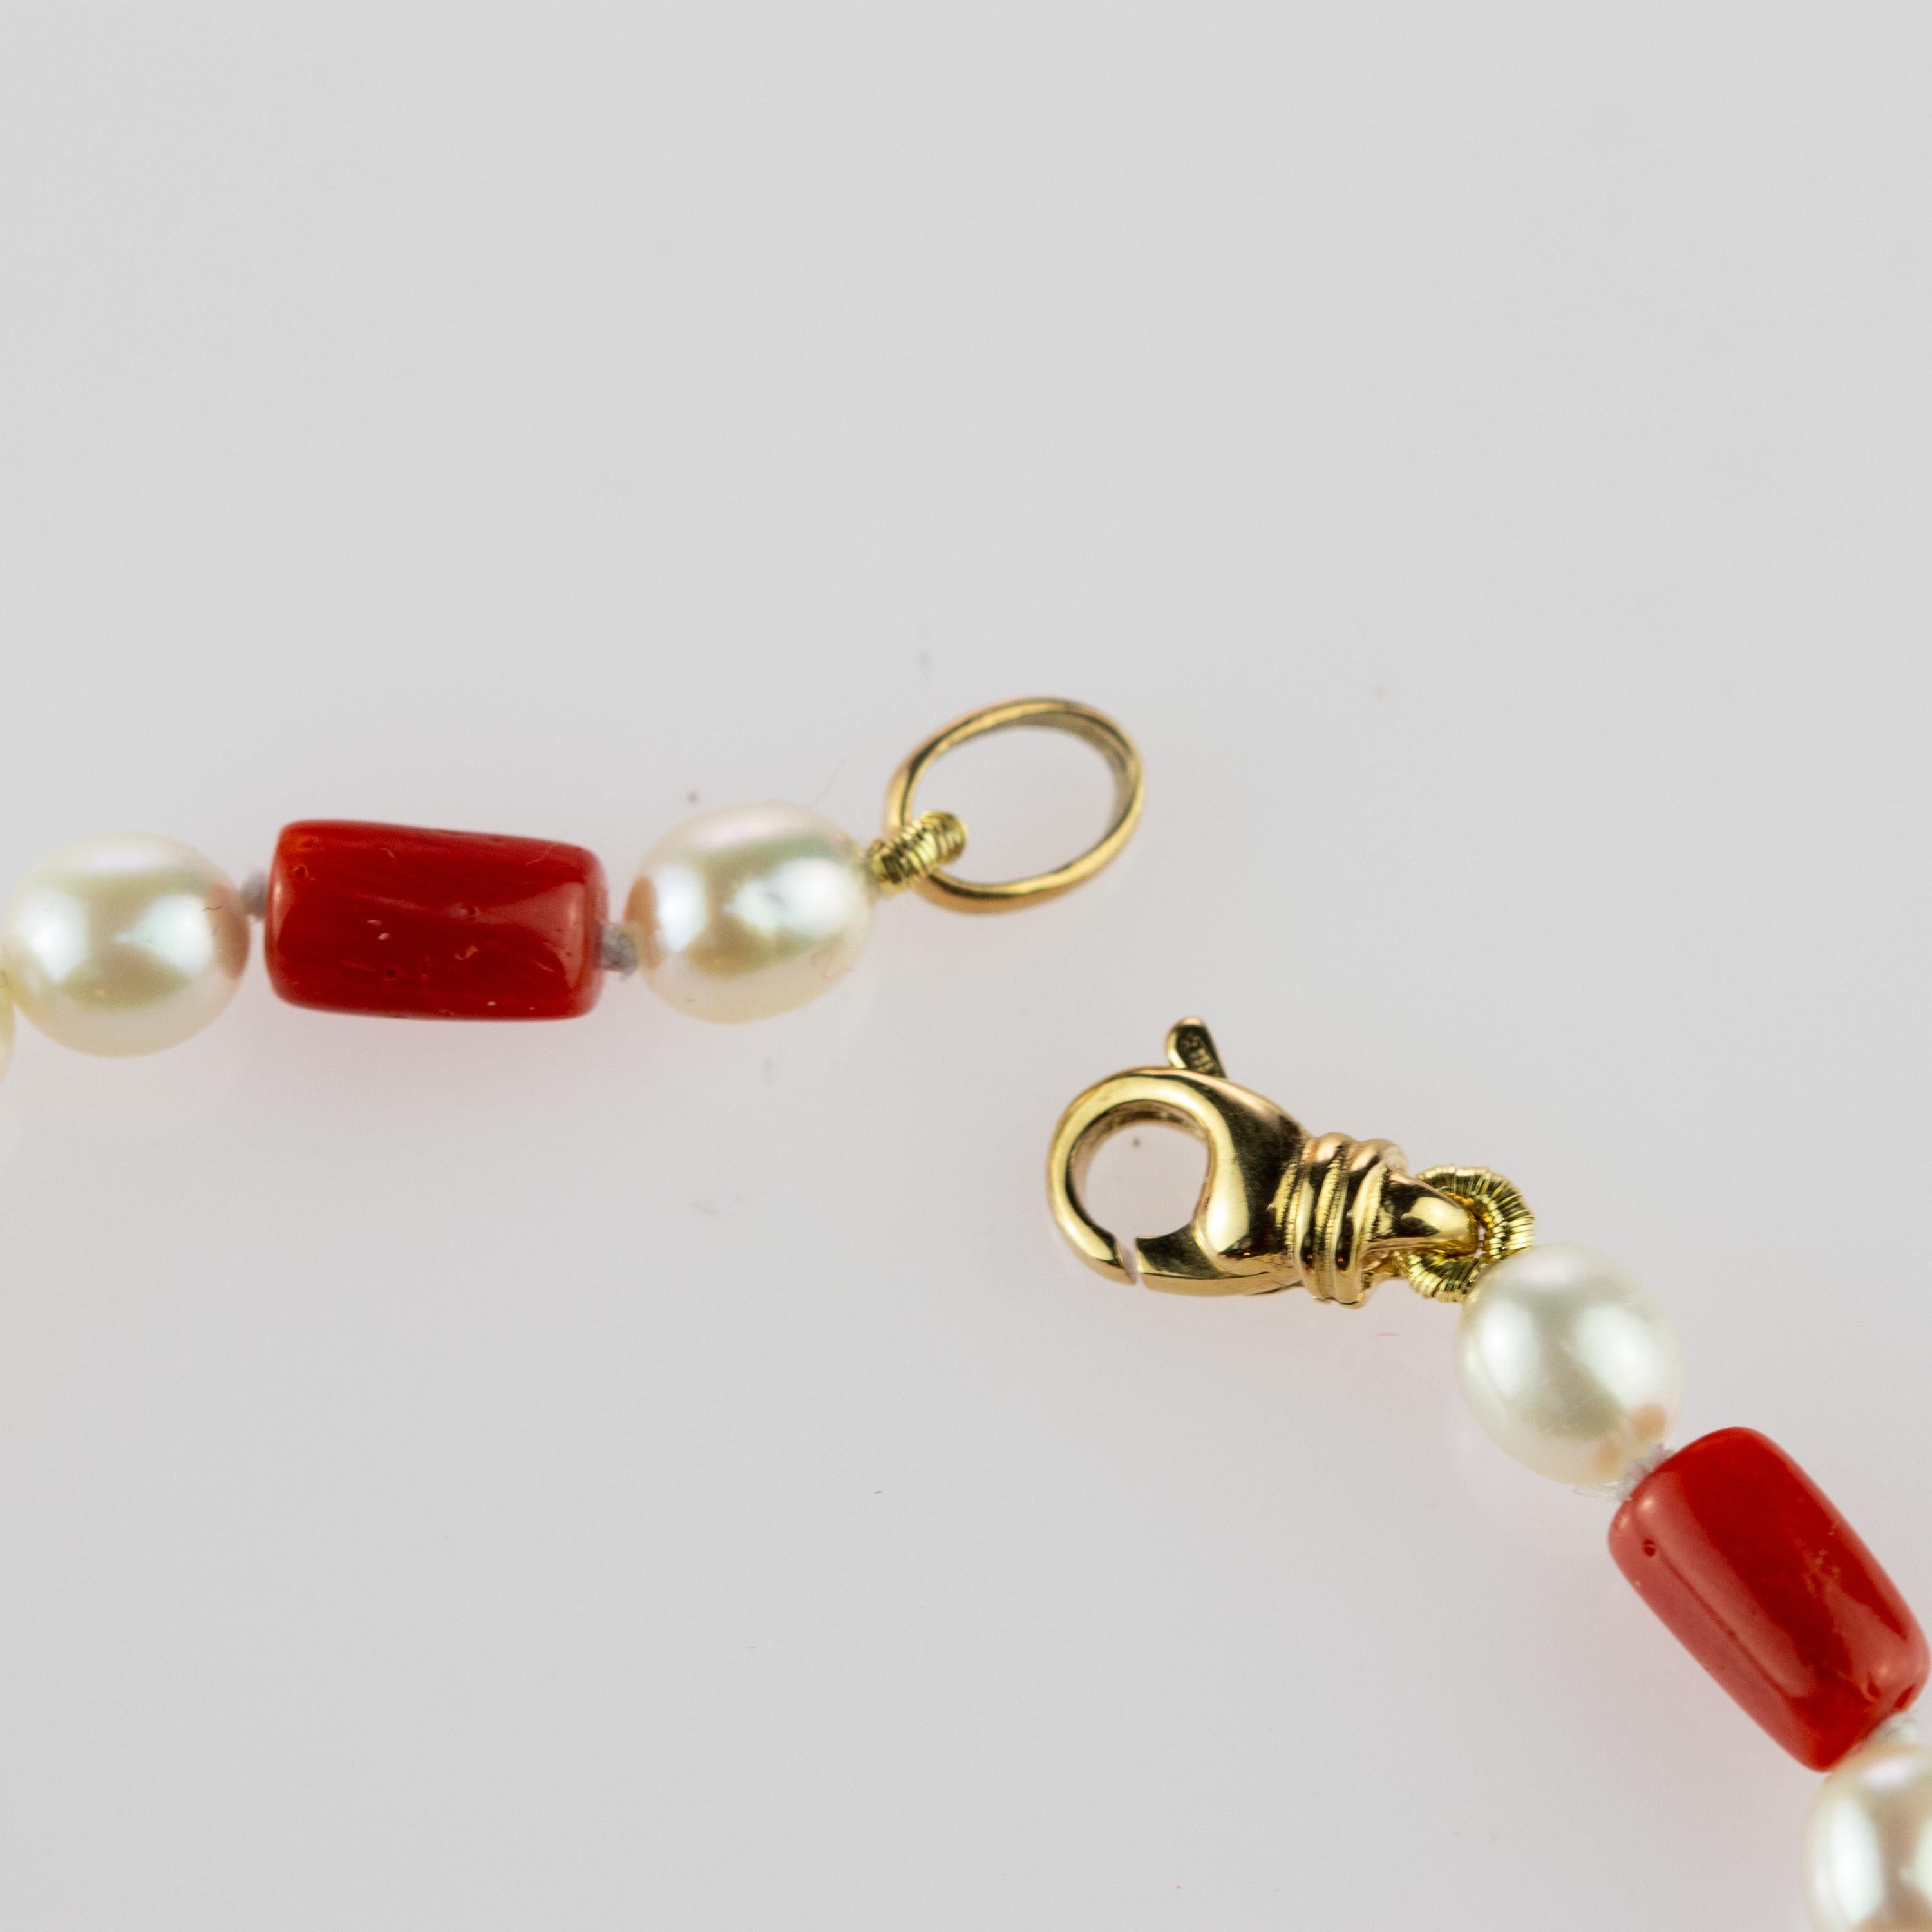 coral and pearl bracelet